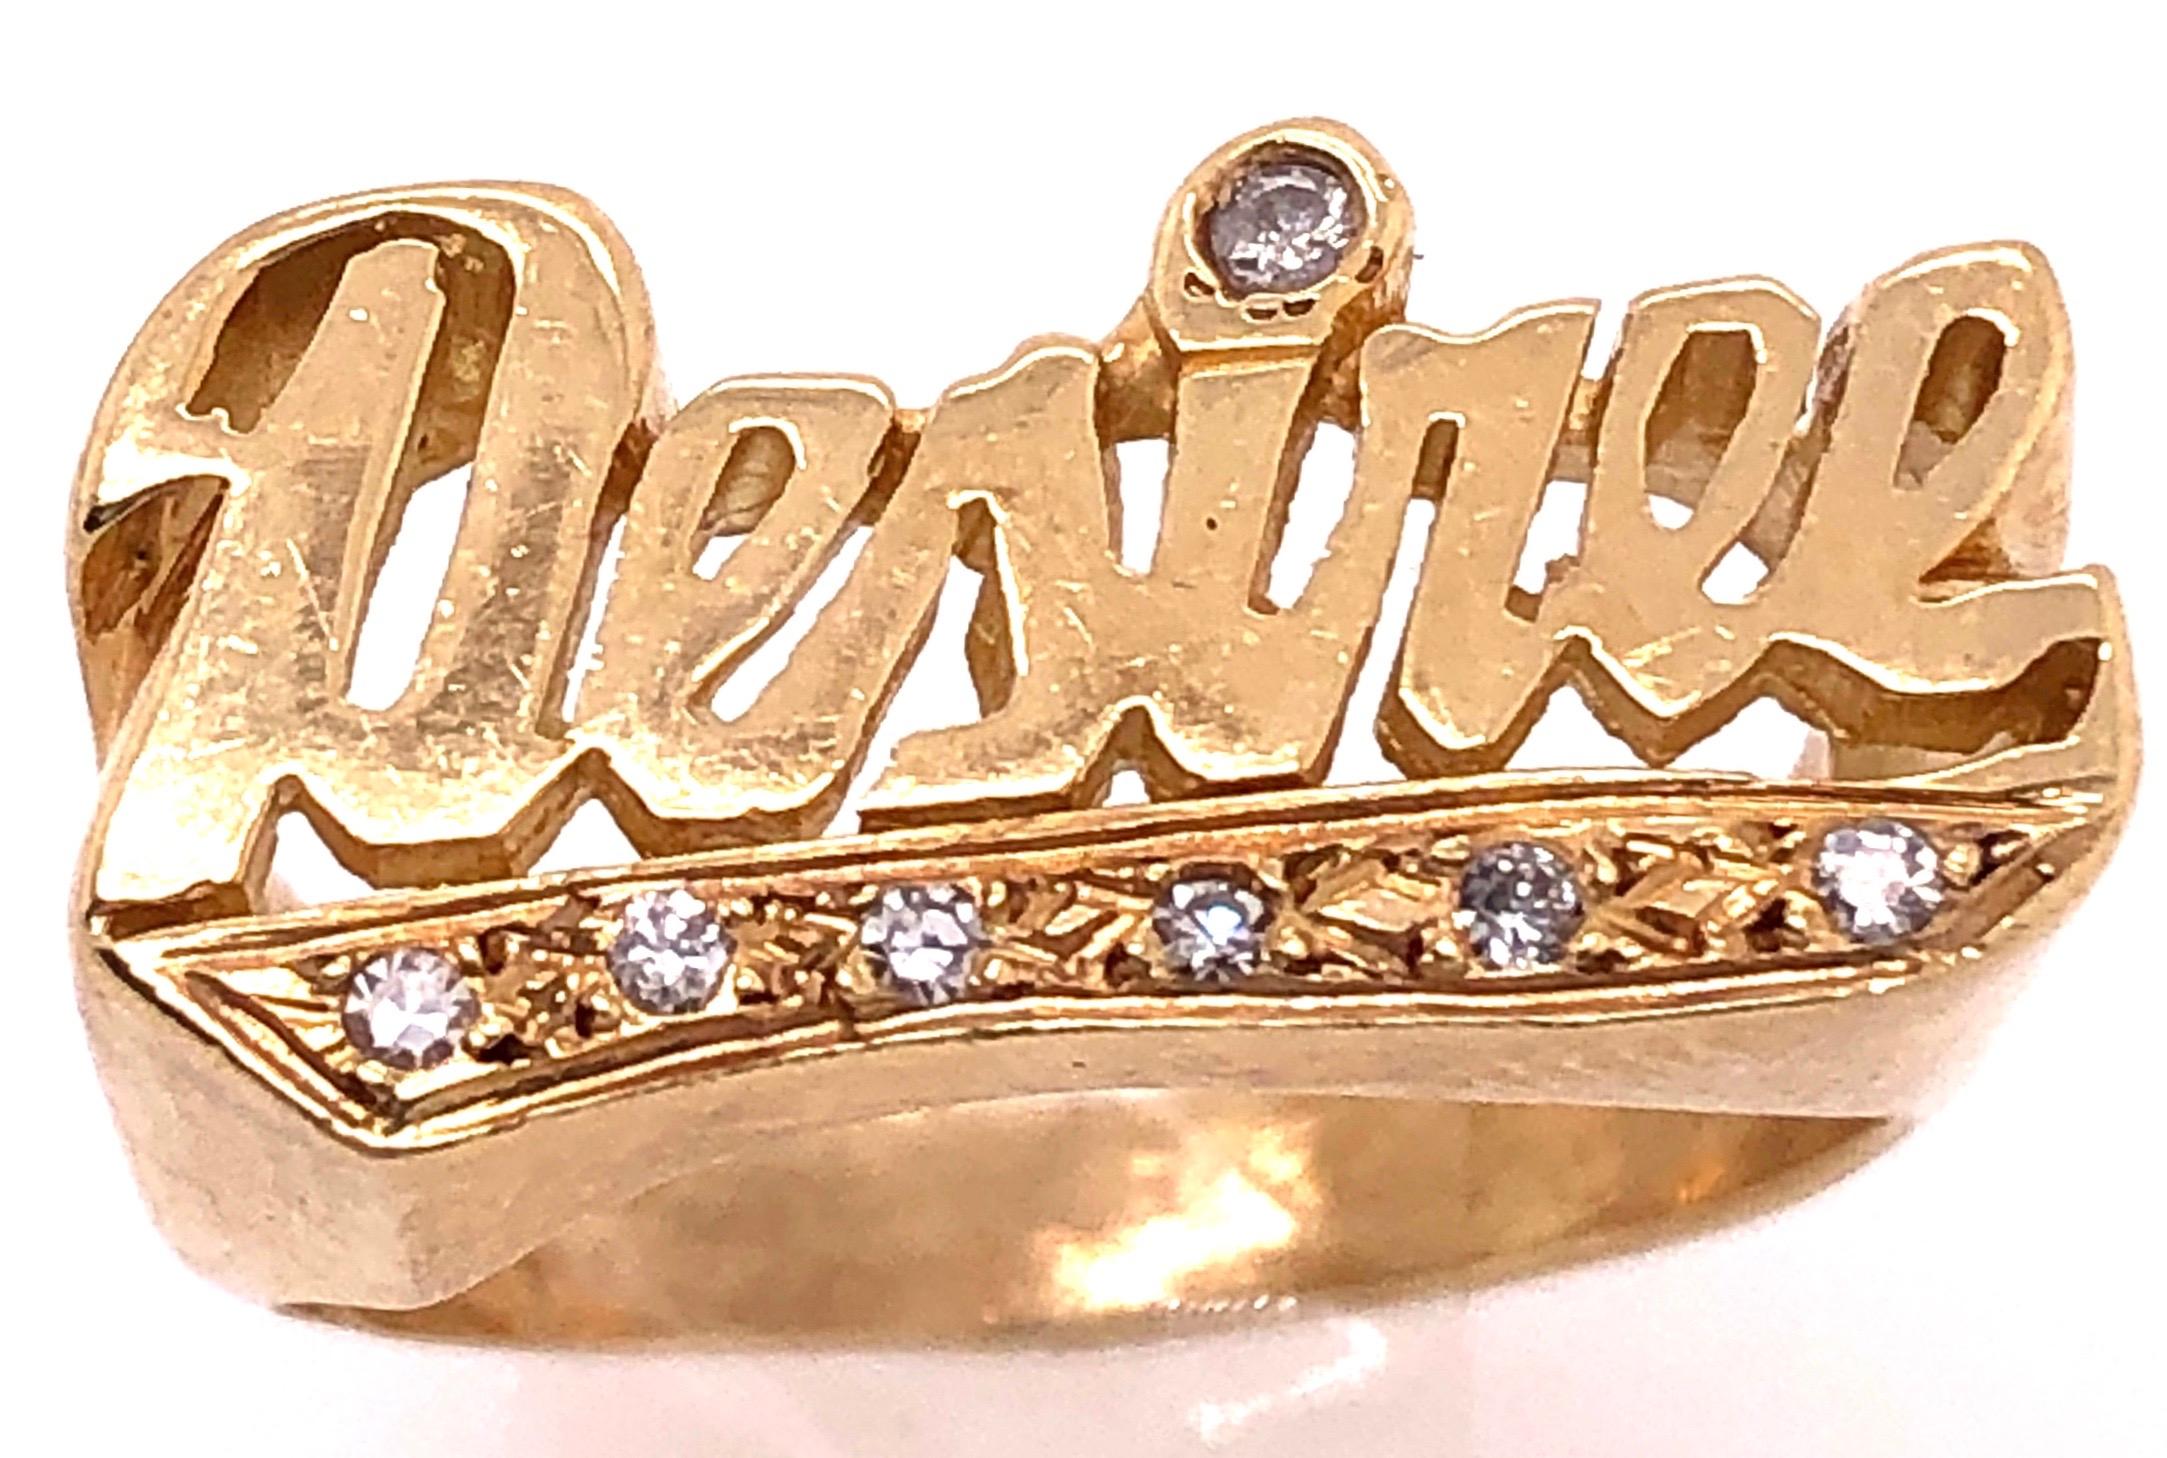 14 Karat Two Tone Yellow and Gold Name Style/Desiree Ring with Diamonds.
6 piece round diamonds.
Size 7
6 grams total weight.